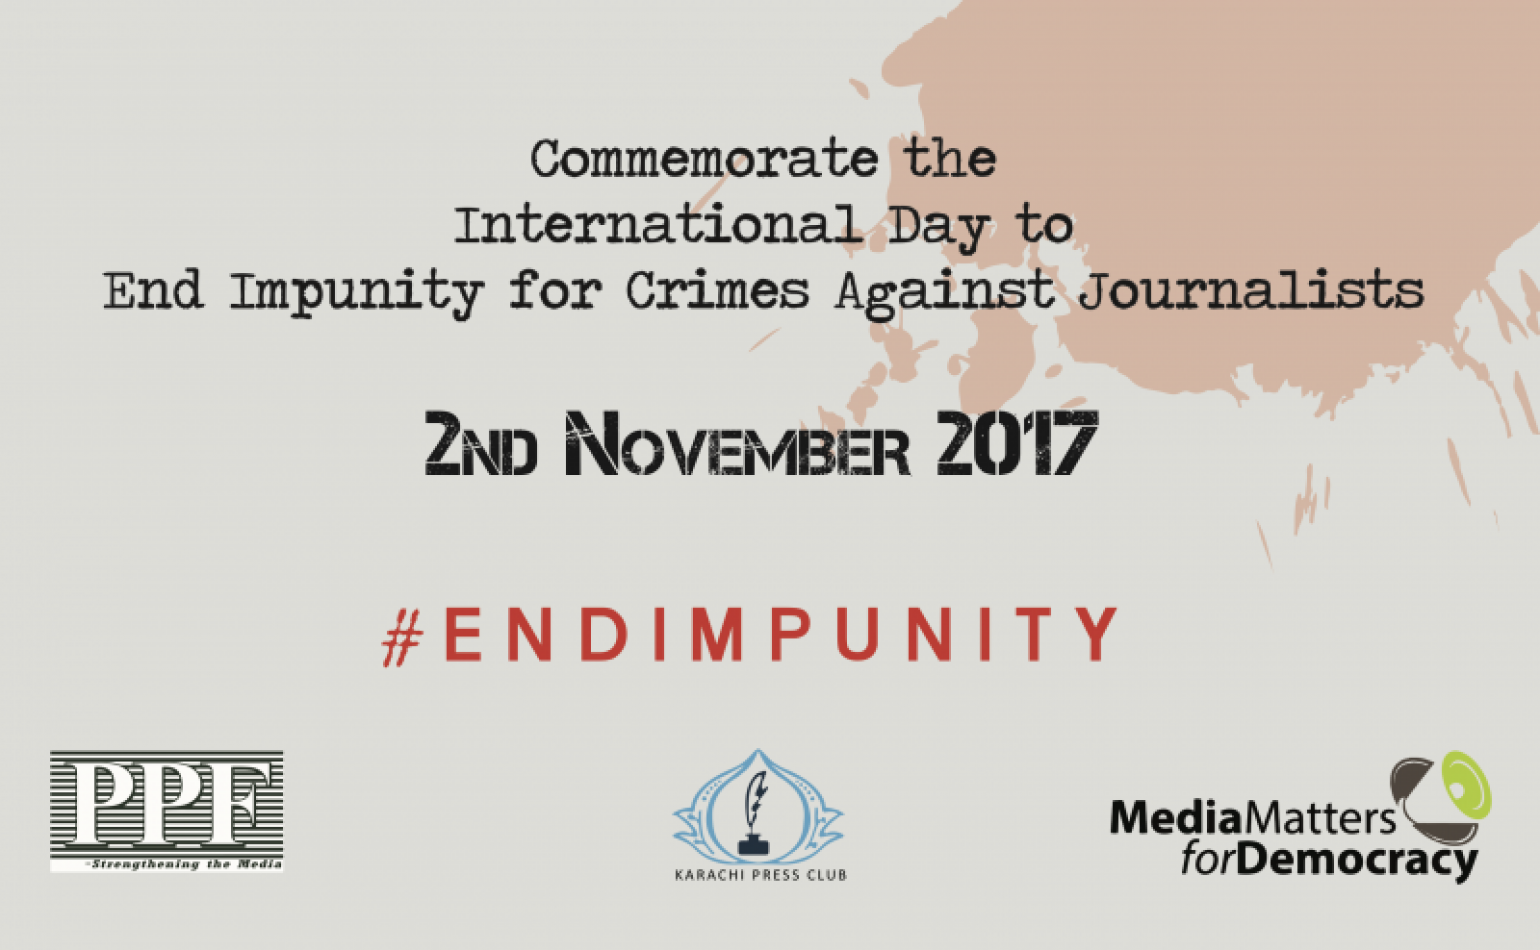 Media Matters for Democracy, Pakistan Press Foundation and Karachi Press Club join hands to commemorate the International Day to End Impunity with the families of slain journalists. Join us!